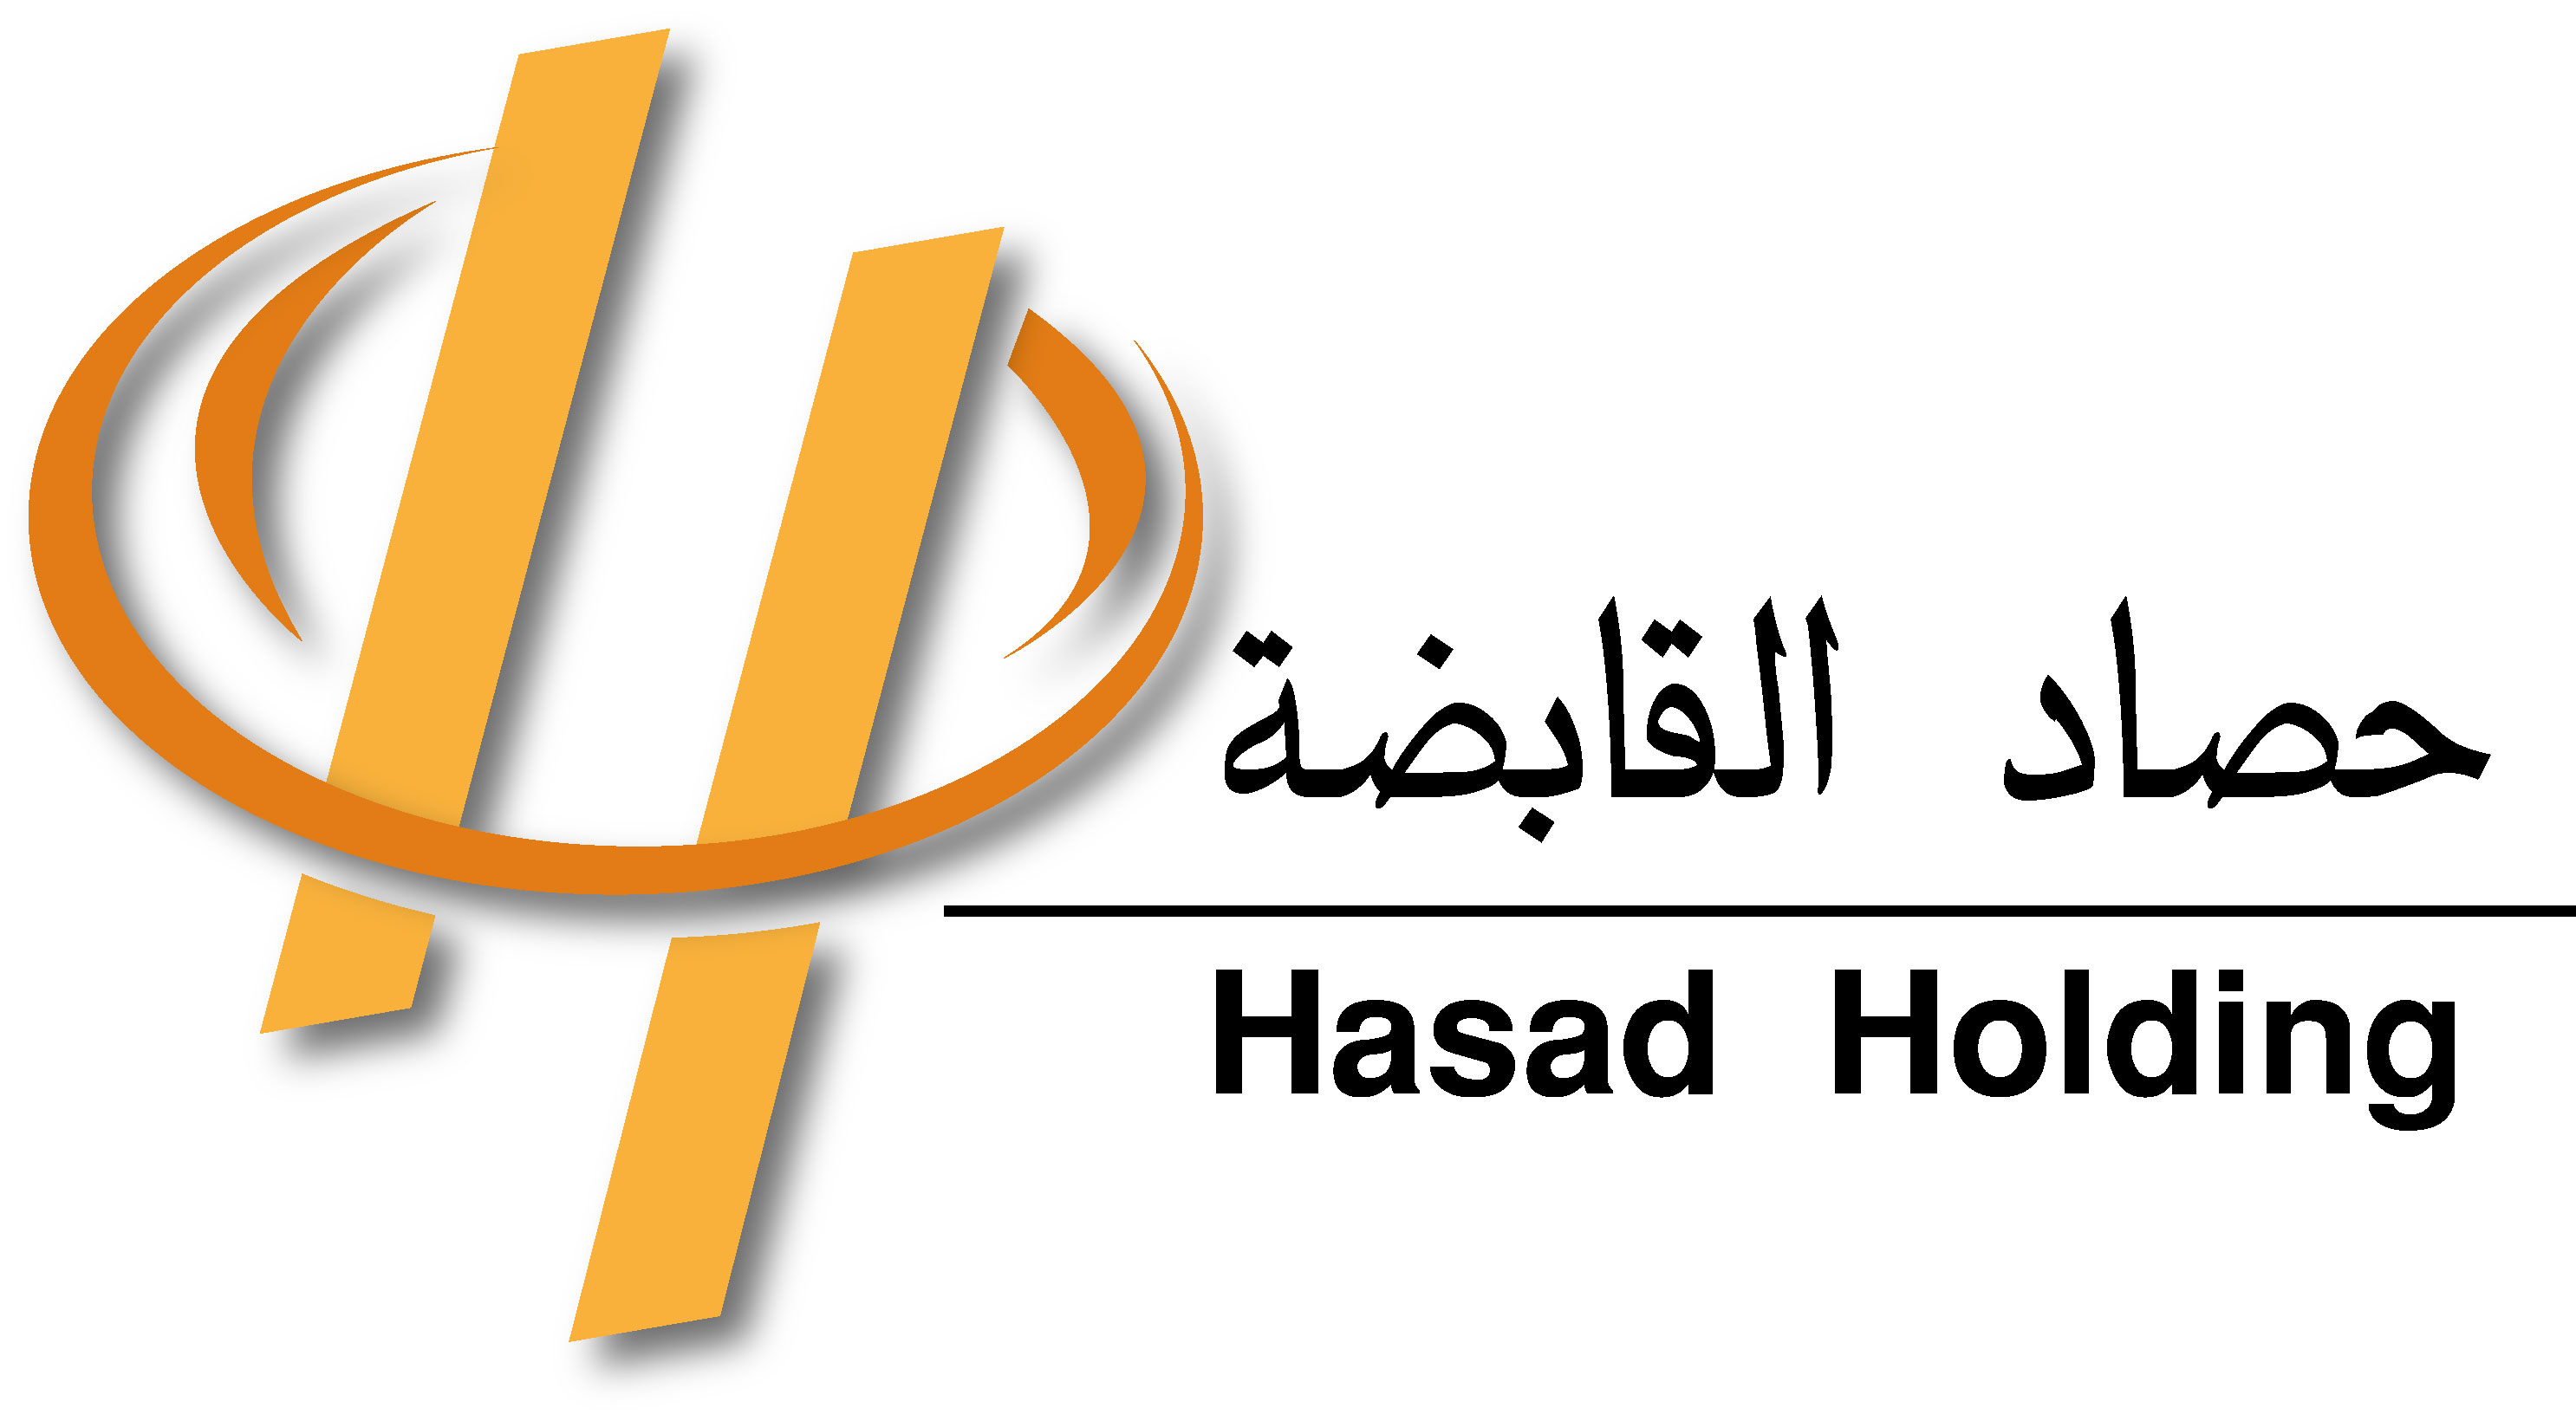 https://www.pakpositions.com/company/hasad-holding